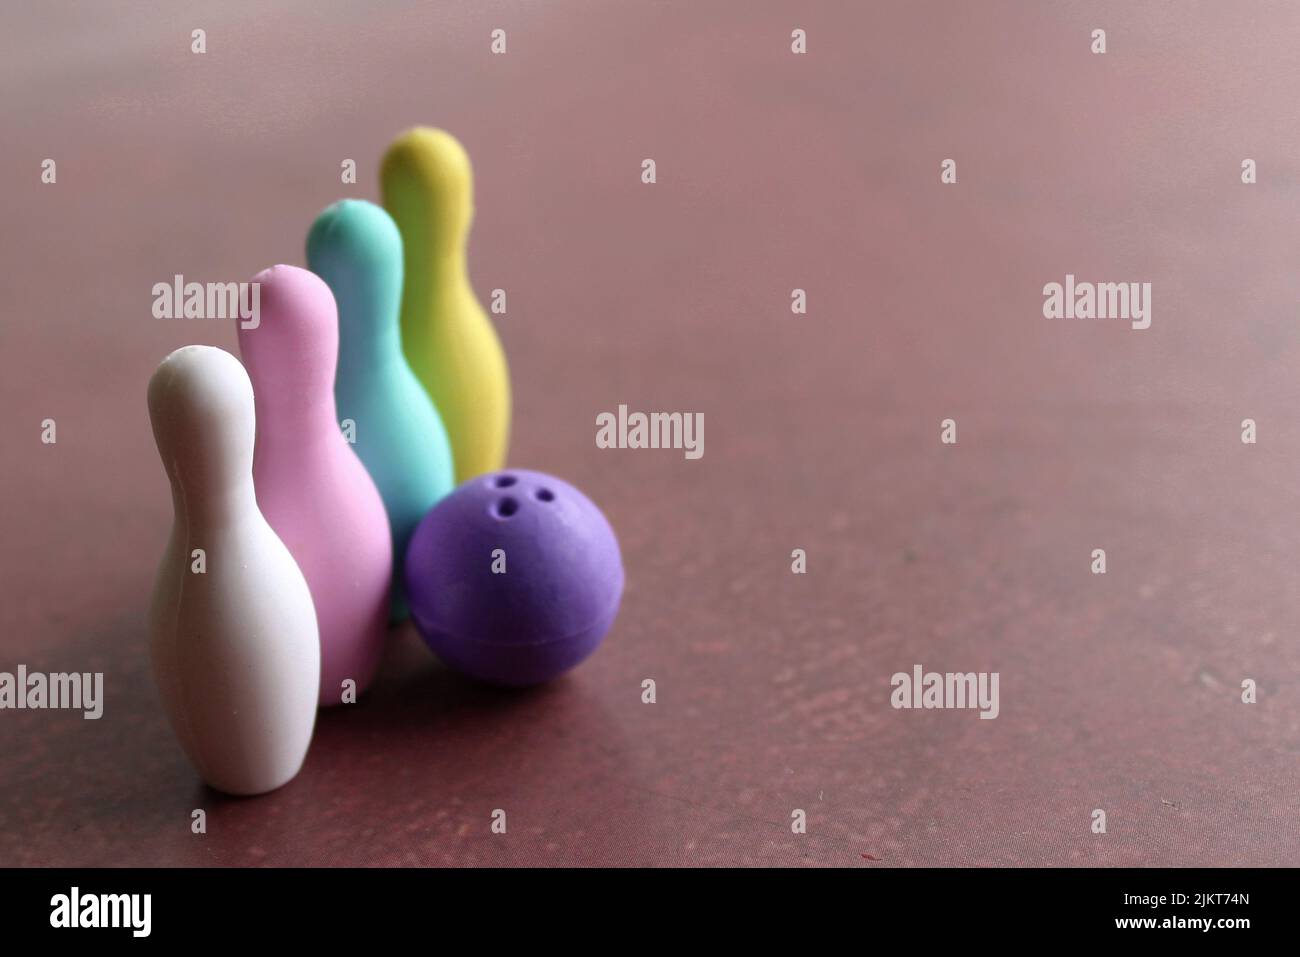 Selective focus image of bowling ball and colorful bowling pins with copy space. Stock Photo